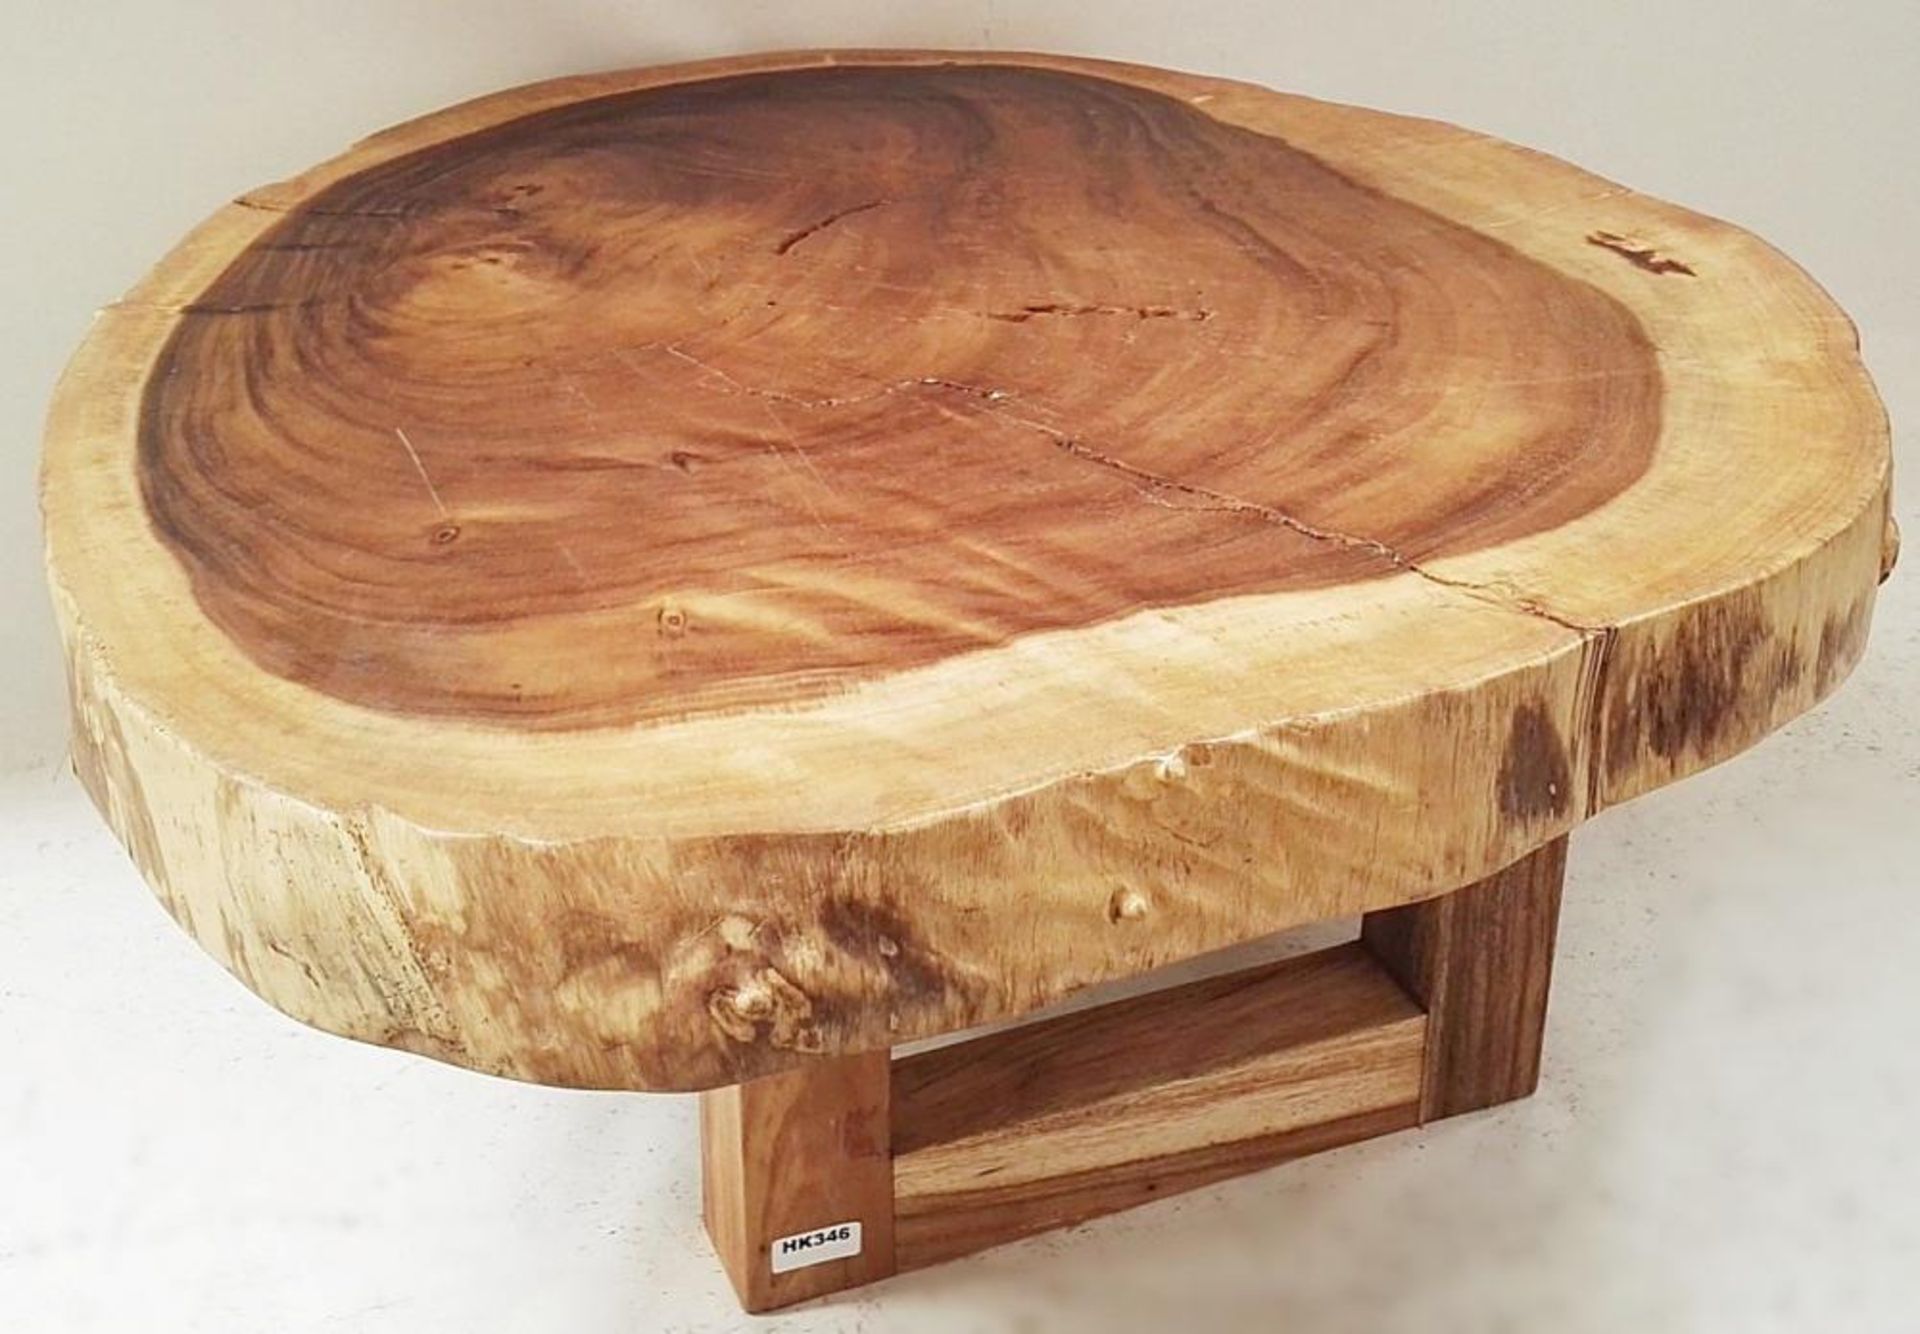 1 x Unique Reclaimed Solid Tree Trunk Coffee Table With Square Base - Dimensions (approx): Diameter - Image 3 of 6